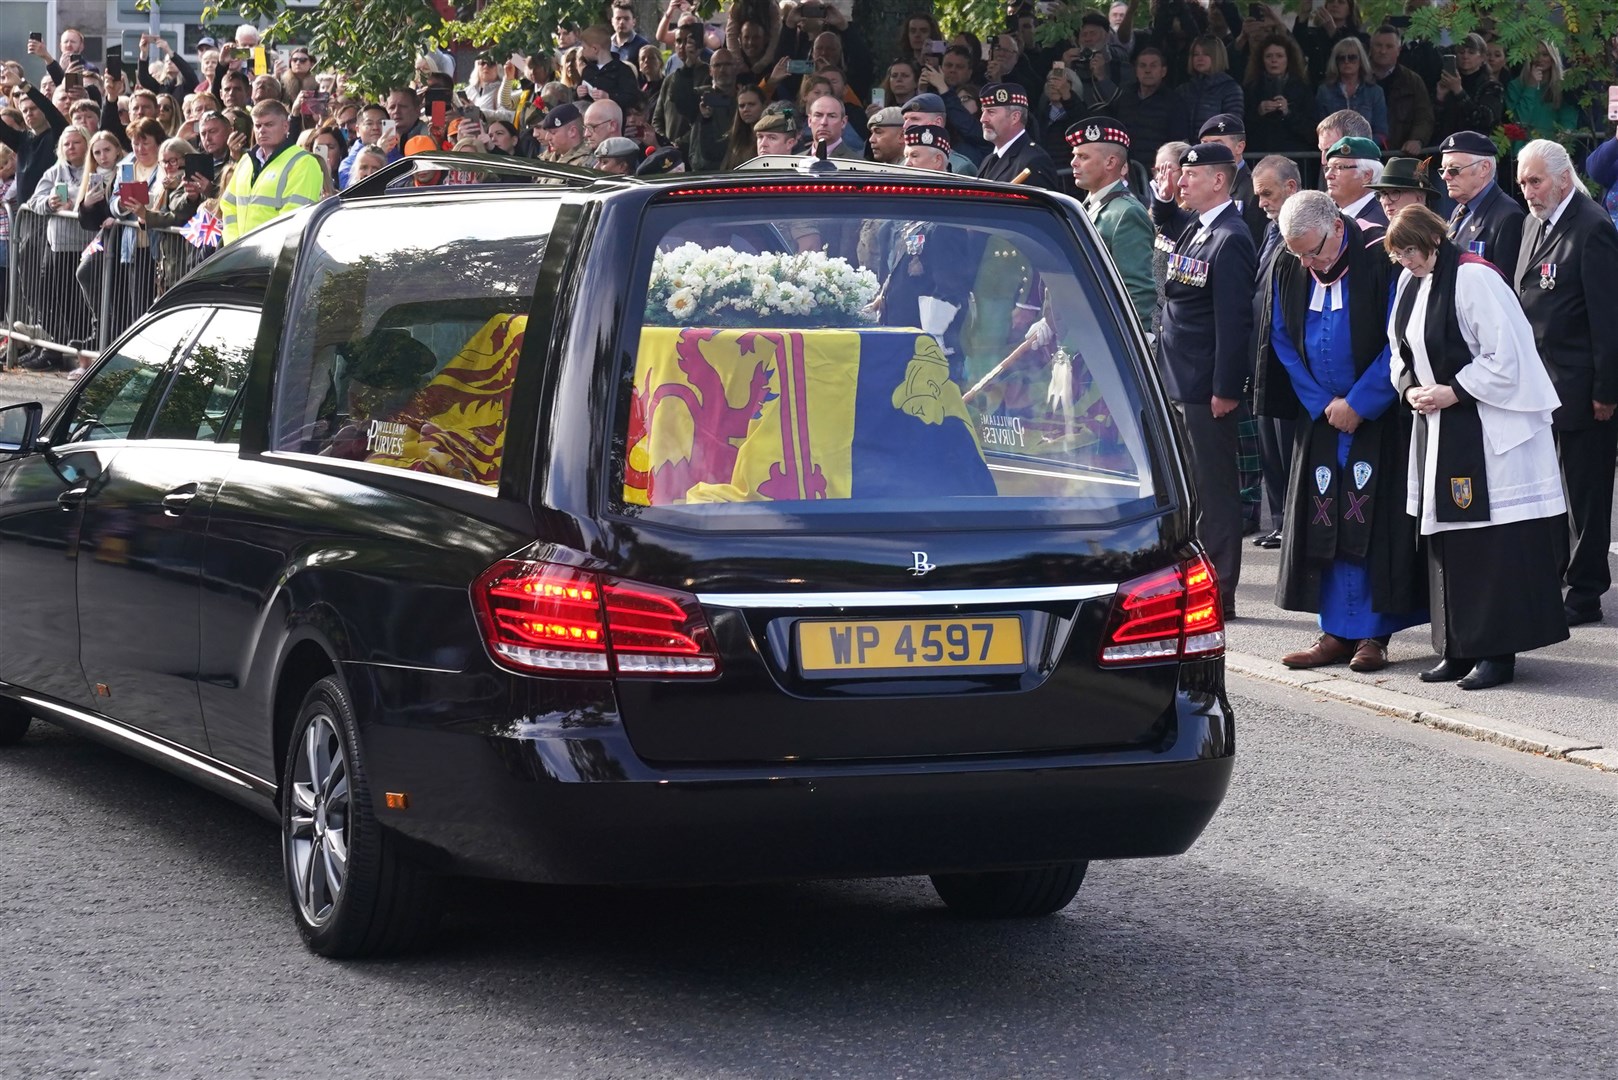 The hearse carrying the Queen’s coffin passes through Ballater. Andrew Milligan/PA